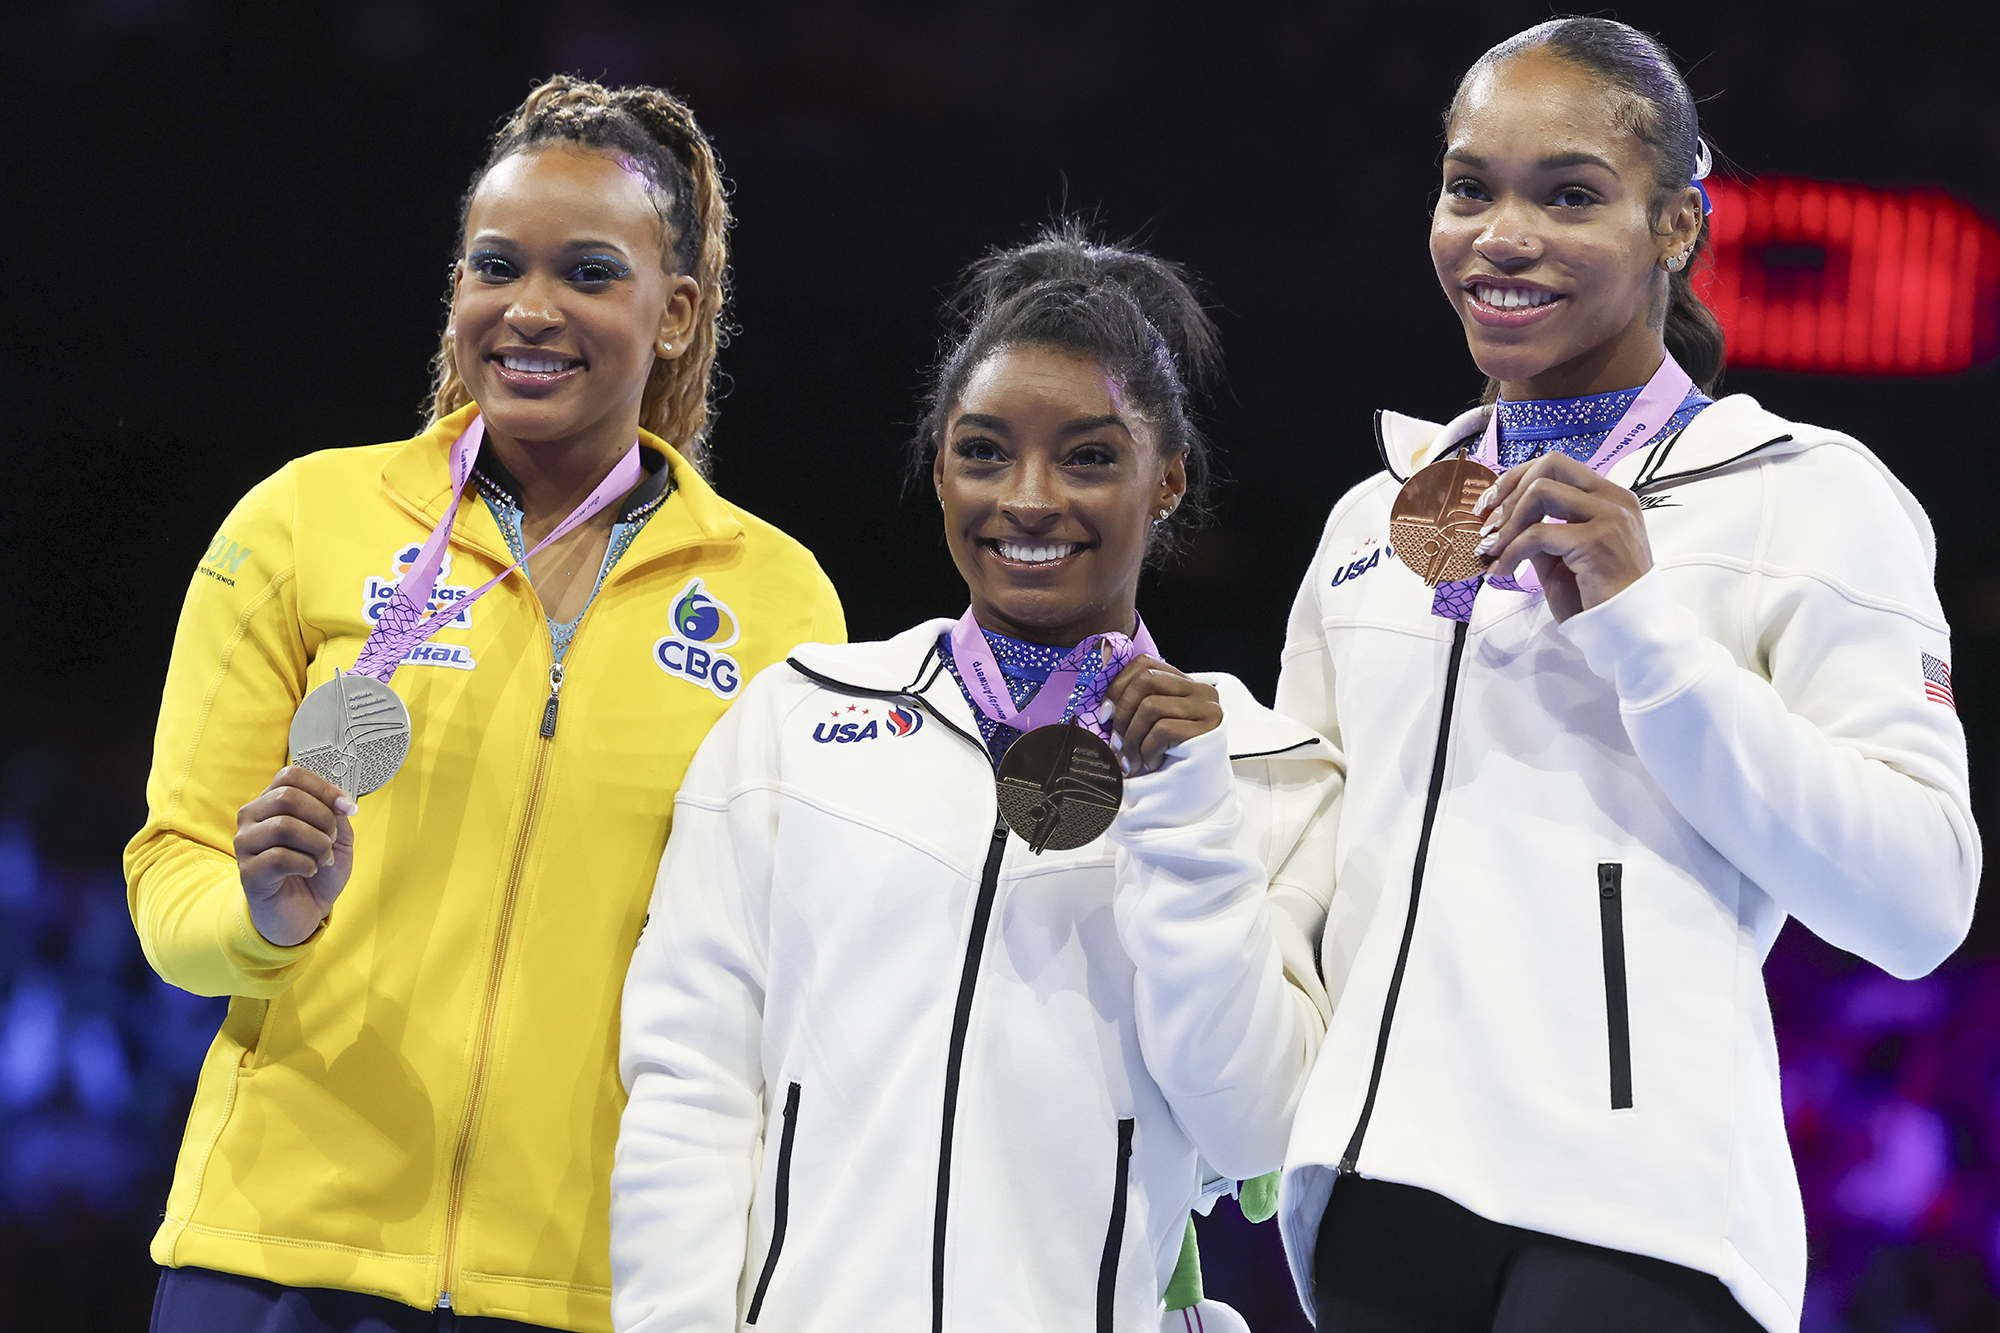 United States' Simone Biles, center and gold medal, Brazil's Rebeca Andrade, left and silver medal and United States' Shilese Jones, right and bronze medal, pose on the podium after the women's all-round final at the Artistic Gymnastics World Championships in Antwerp, Belgium, Friday, Oct. 6, 2023.